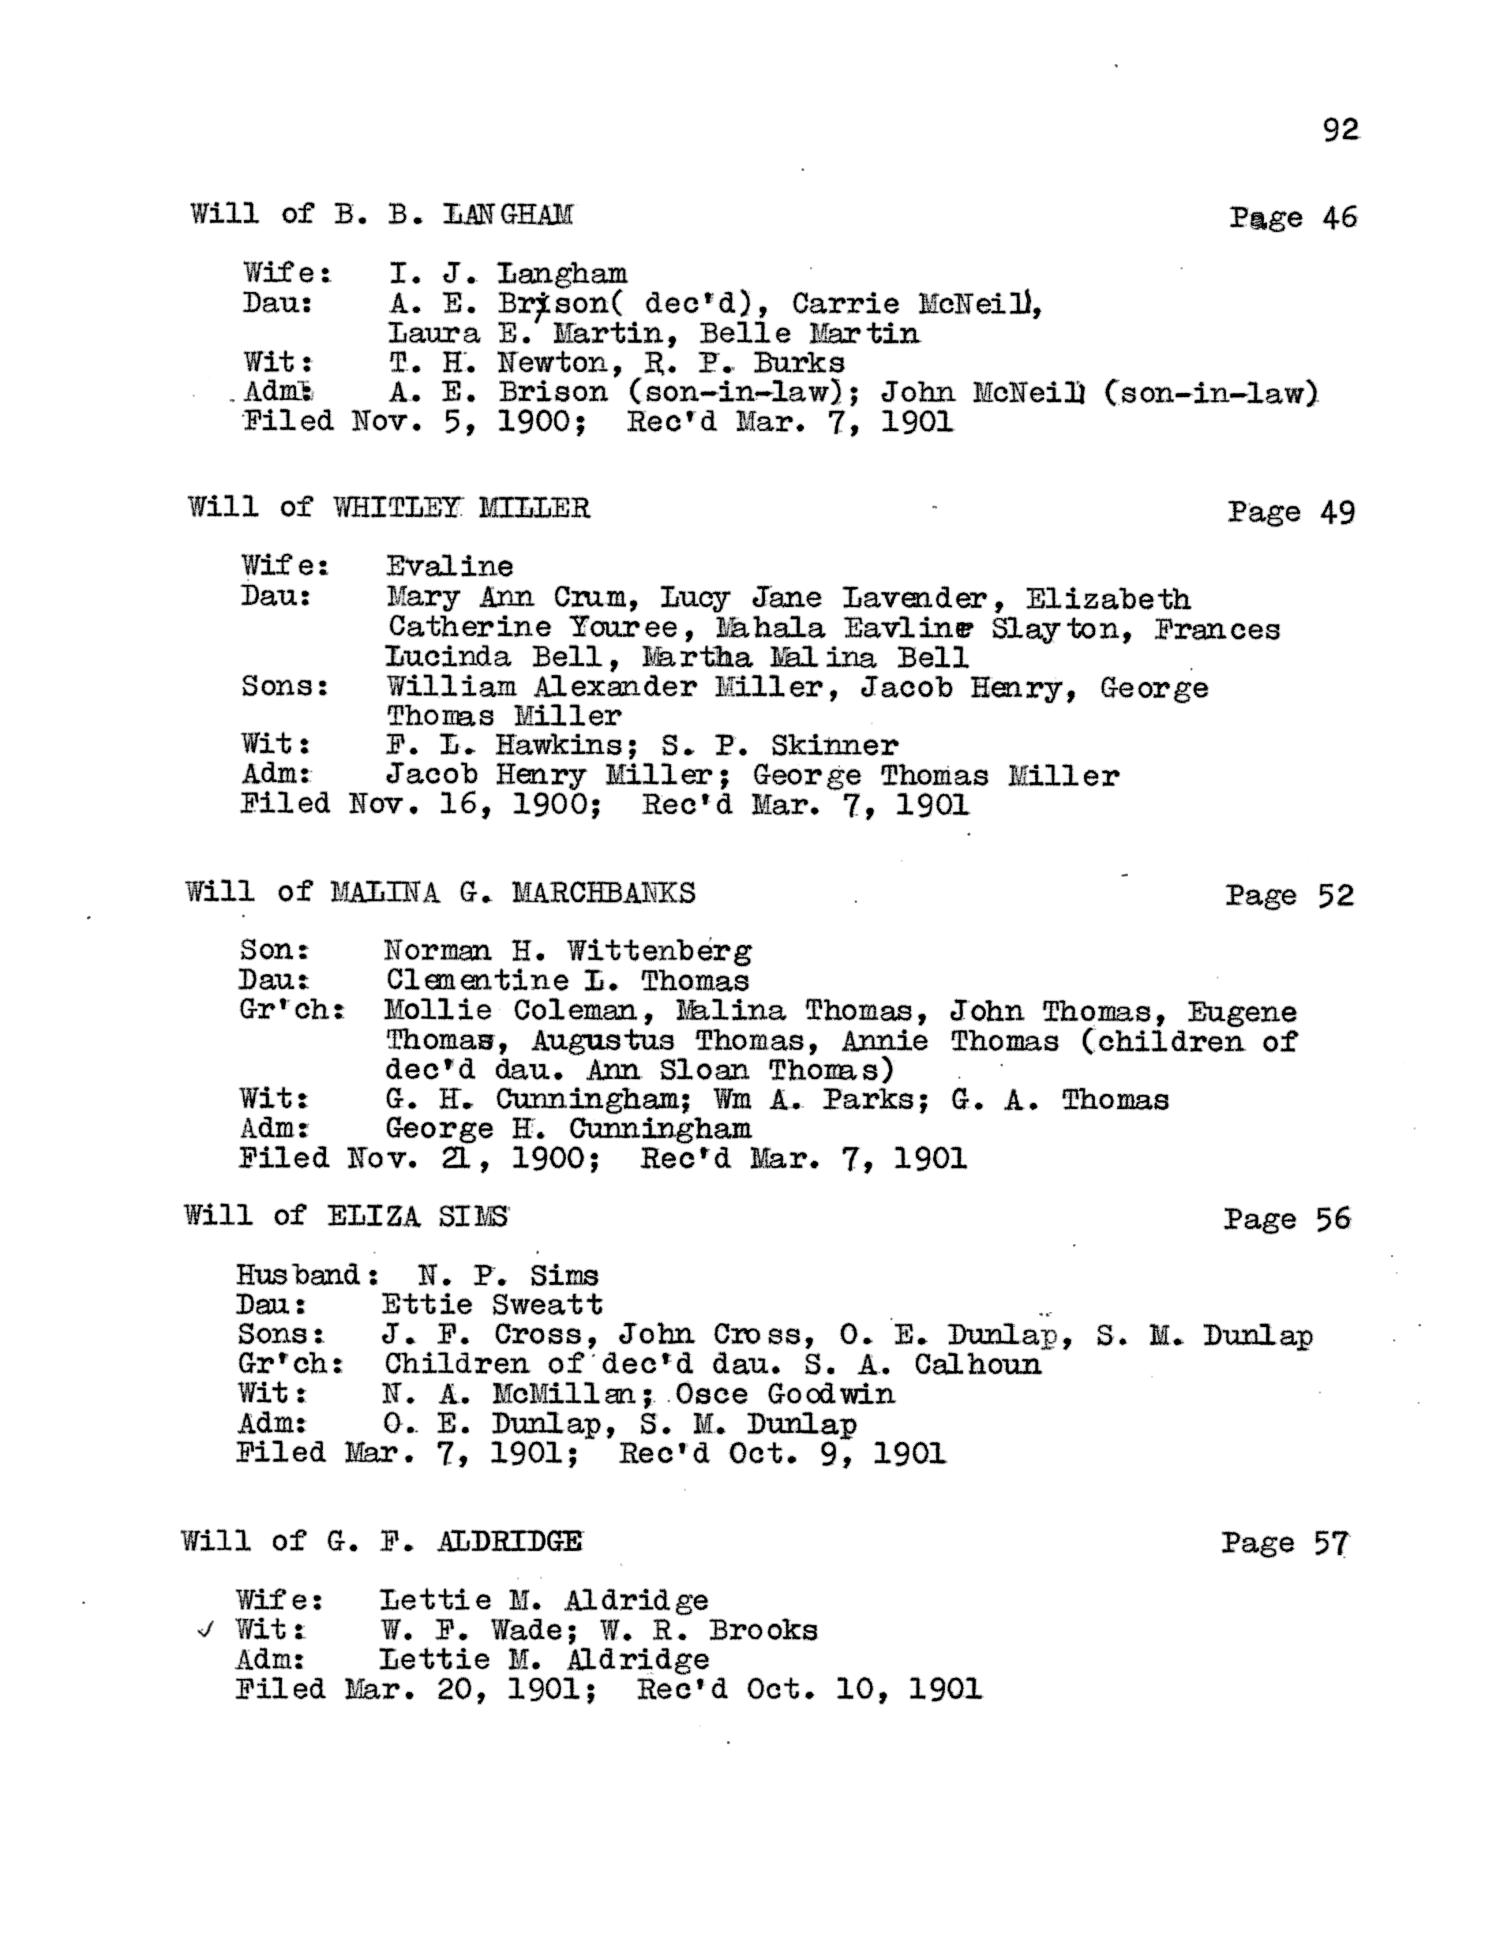 Texas Genealogical Records Ellis County Volume 14 1850 1918 Page 92 The Portal To Texas History